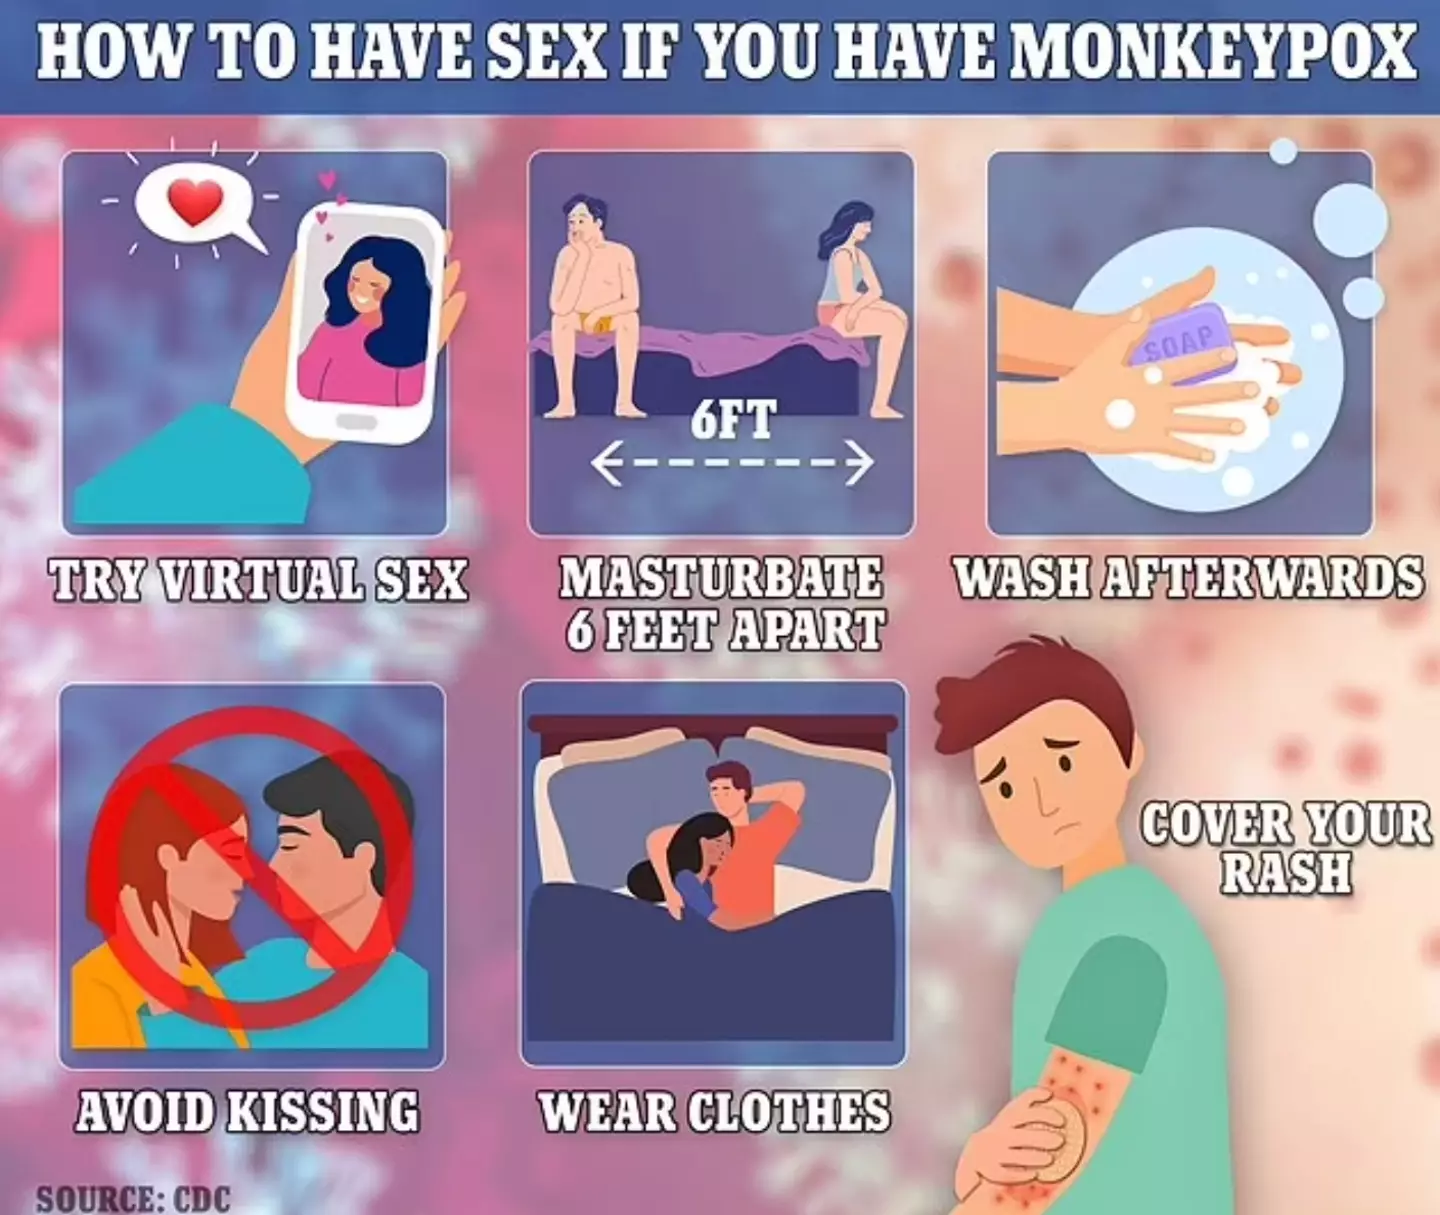 The CDC has released rather strange guidance on how to have sex safely if you are infected.